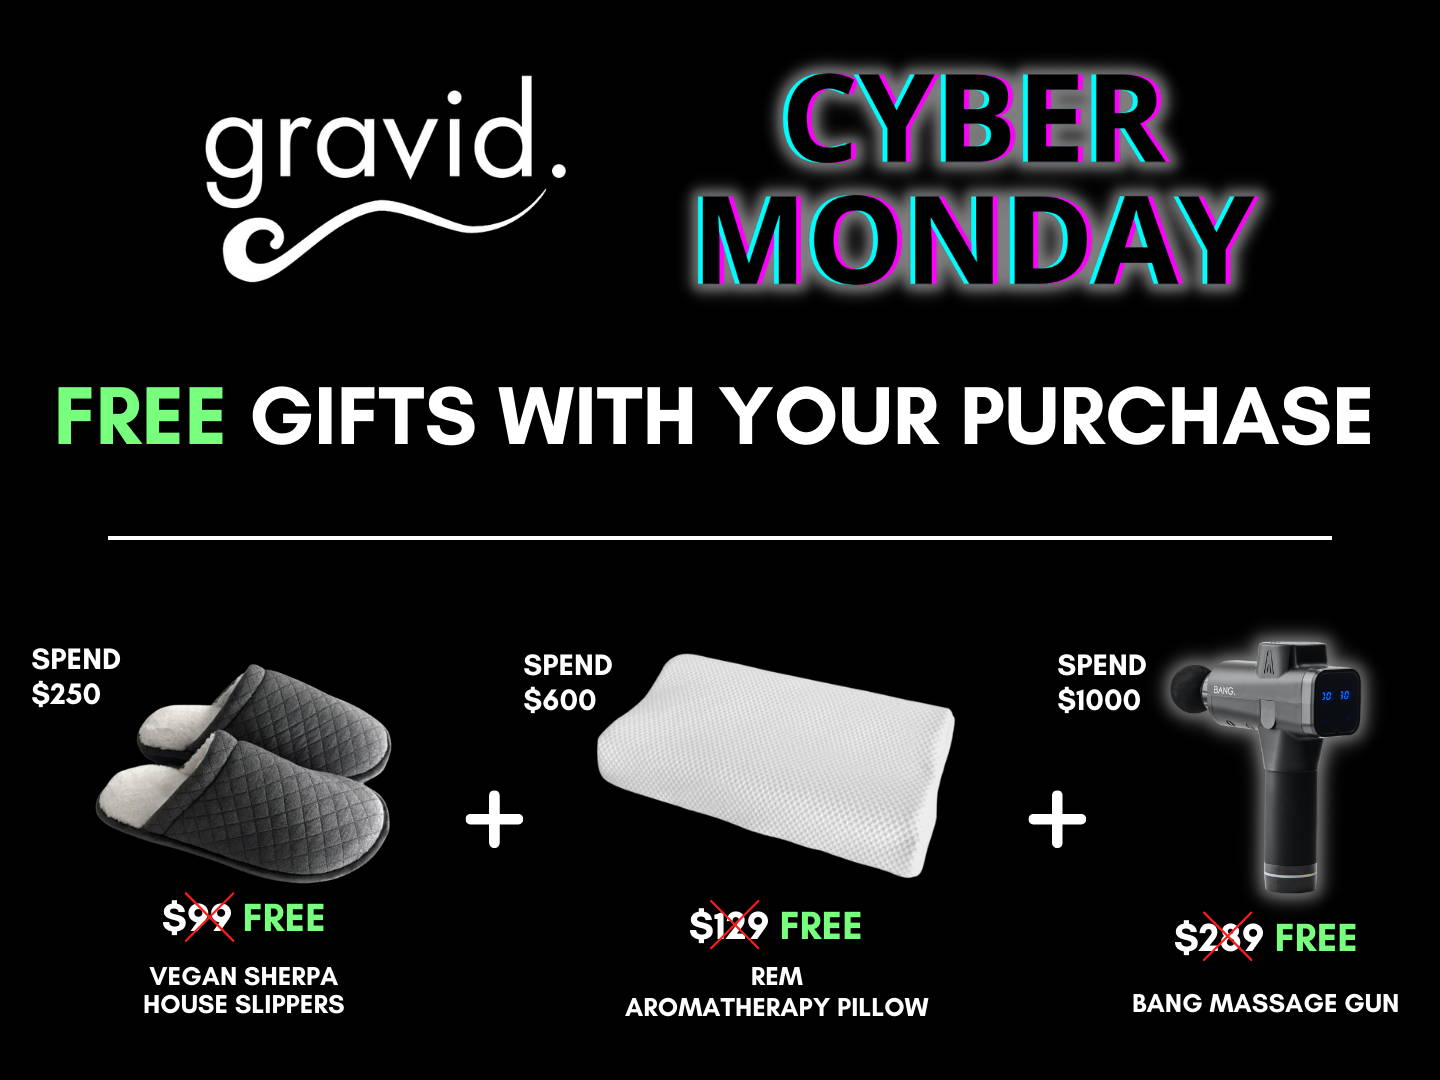 Gravid - Cyber Monday - Free Gifts with your purchase.